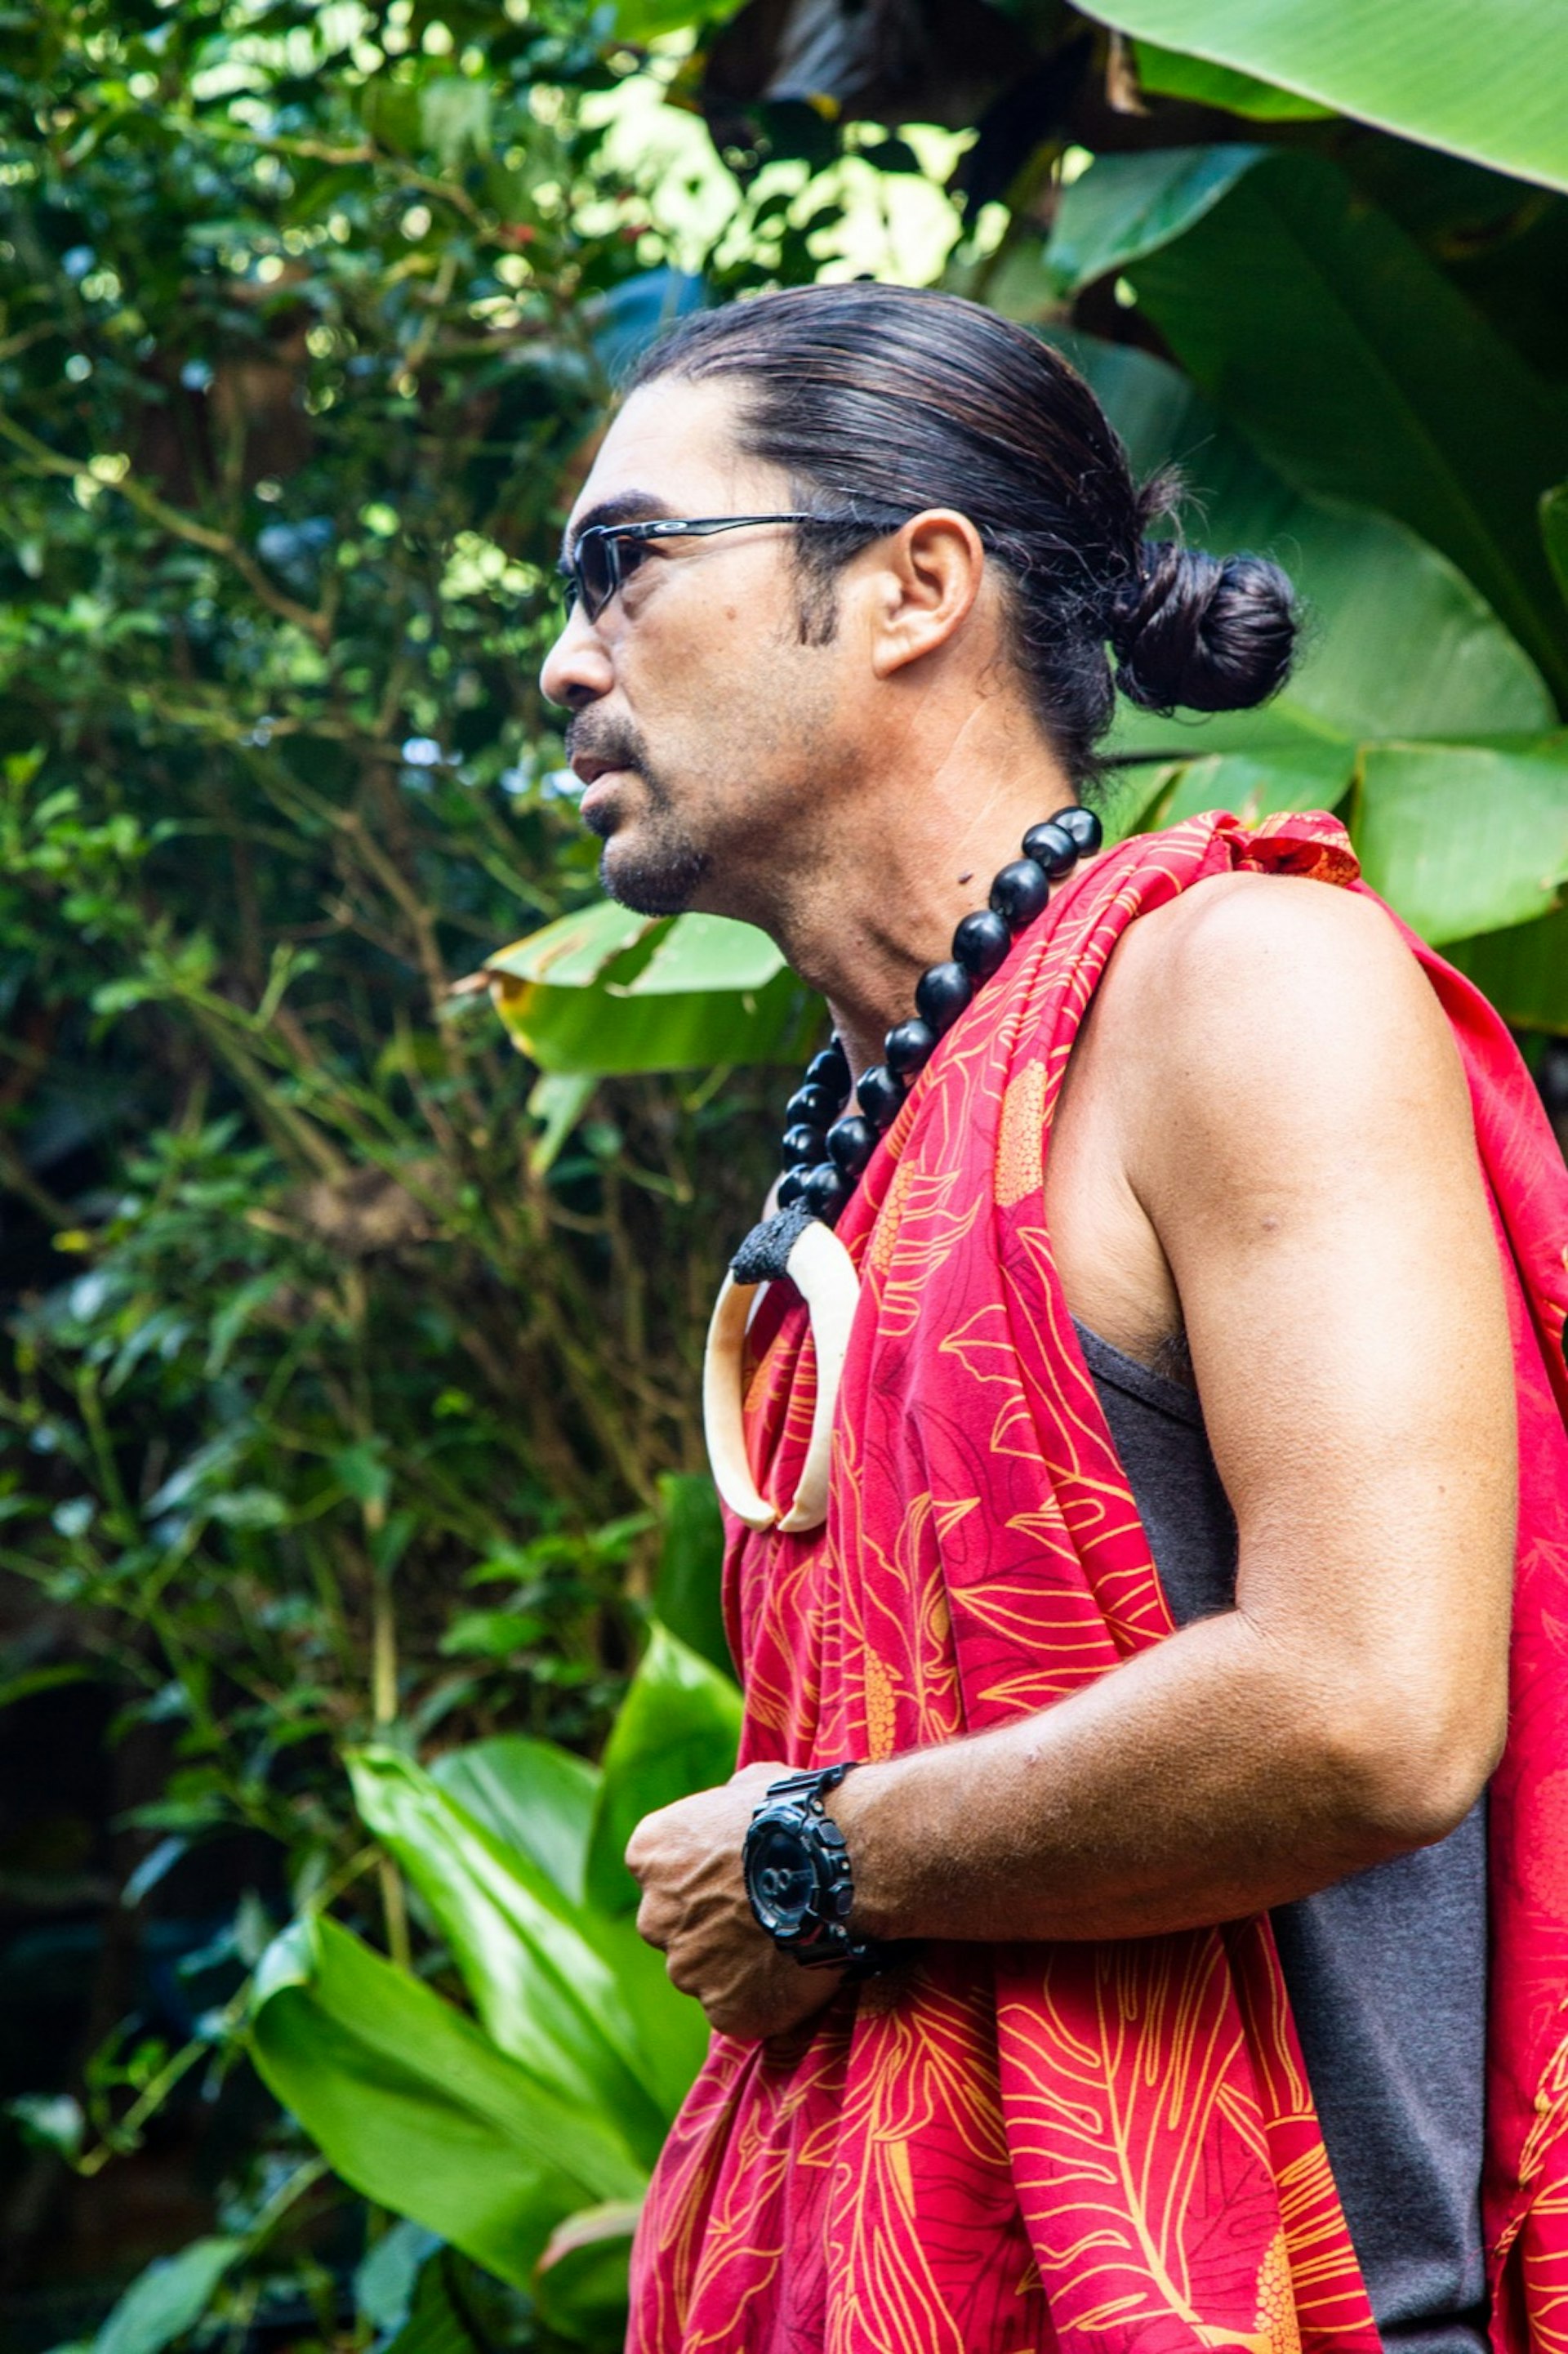 A man leads a group through a tropical jungle, dressed in a traditional Hawaiian tunic with a large necklace and his hair in a tight bun. He also wears modern sunglasses and a heavy modern watch